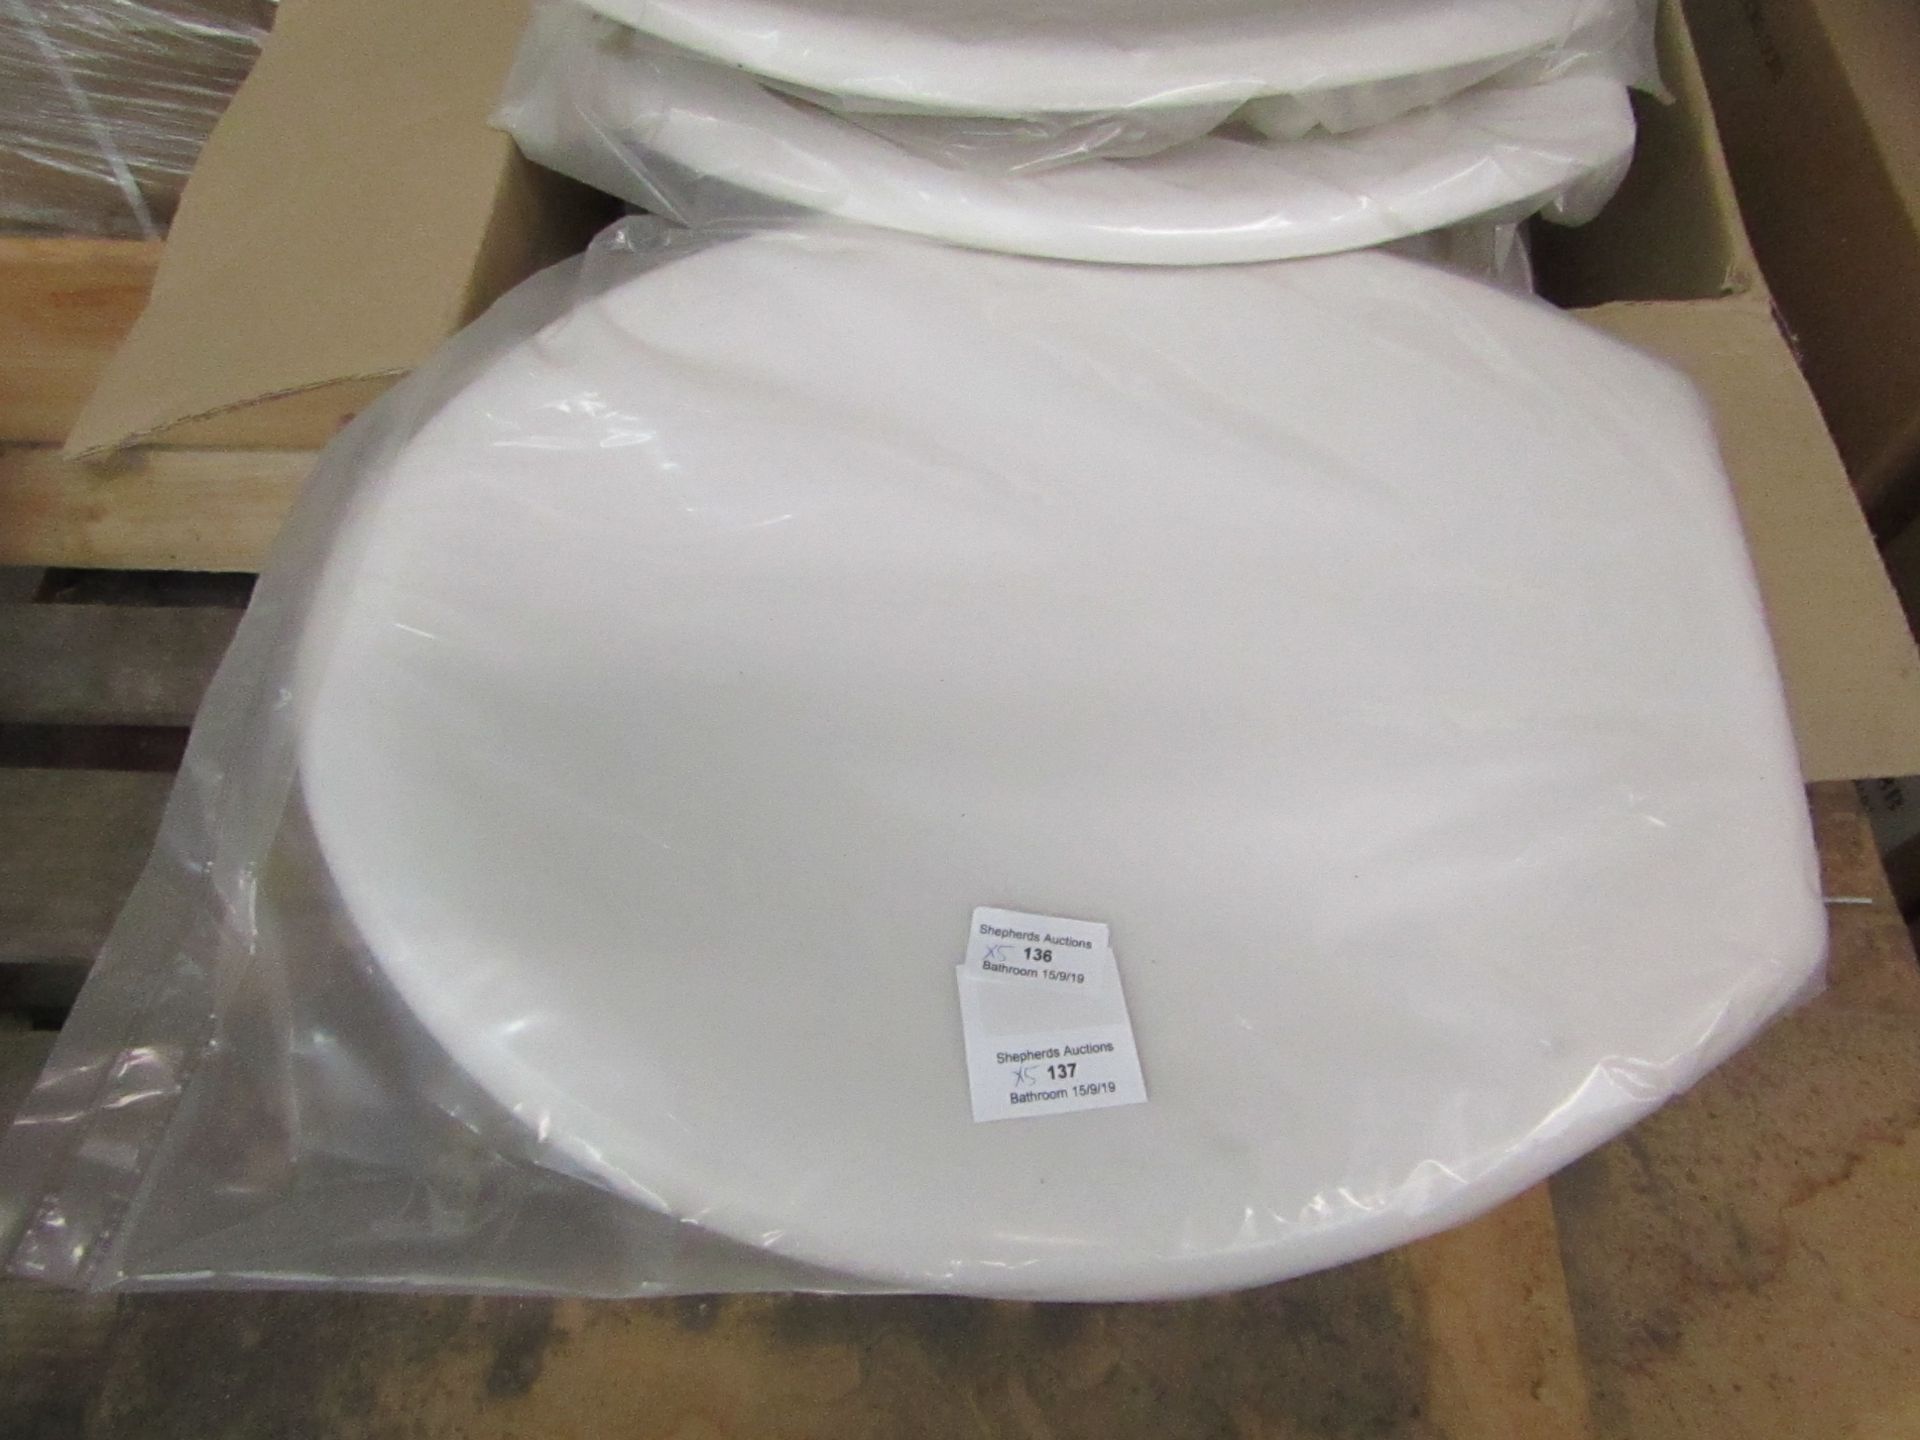 5x Unbranded Toilet seats, new and bagged